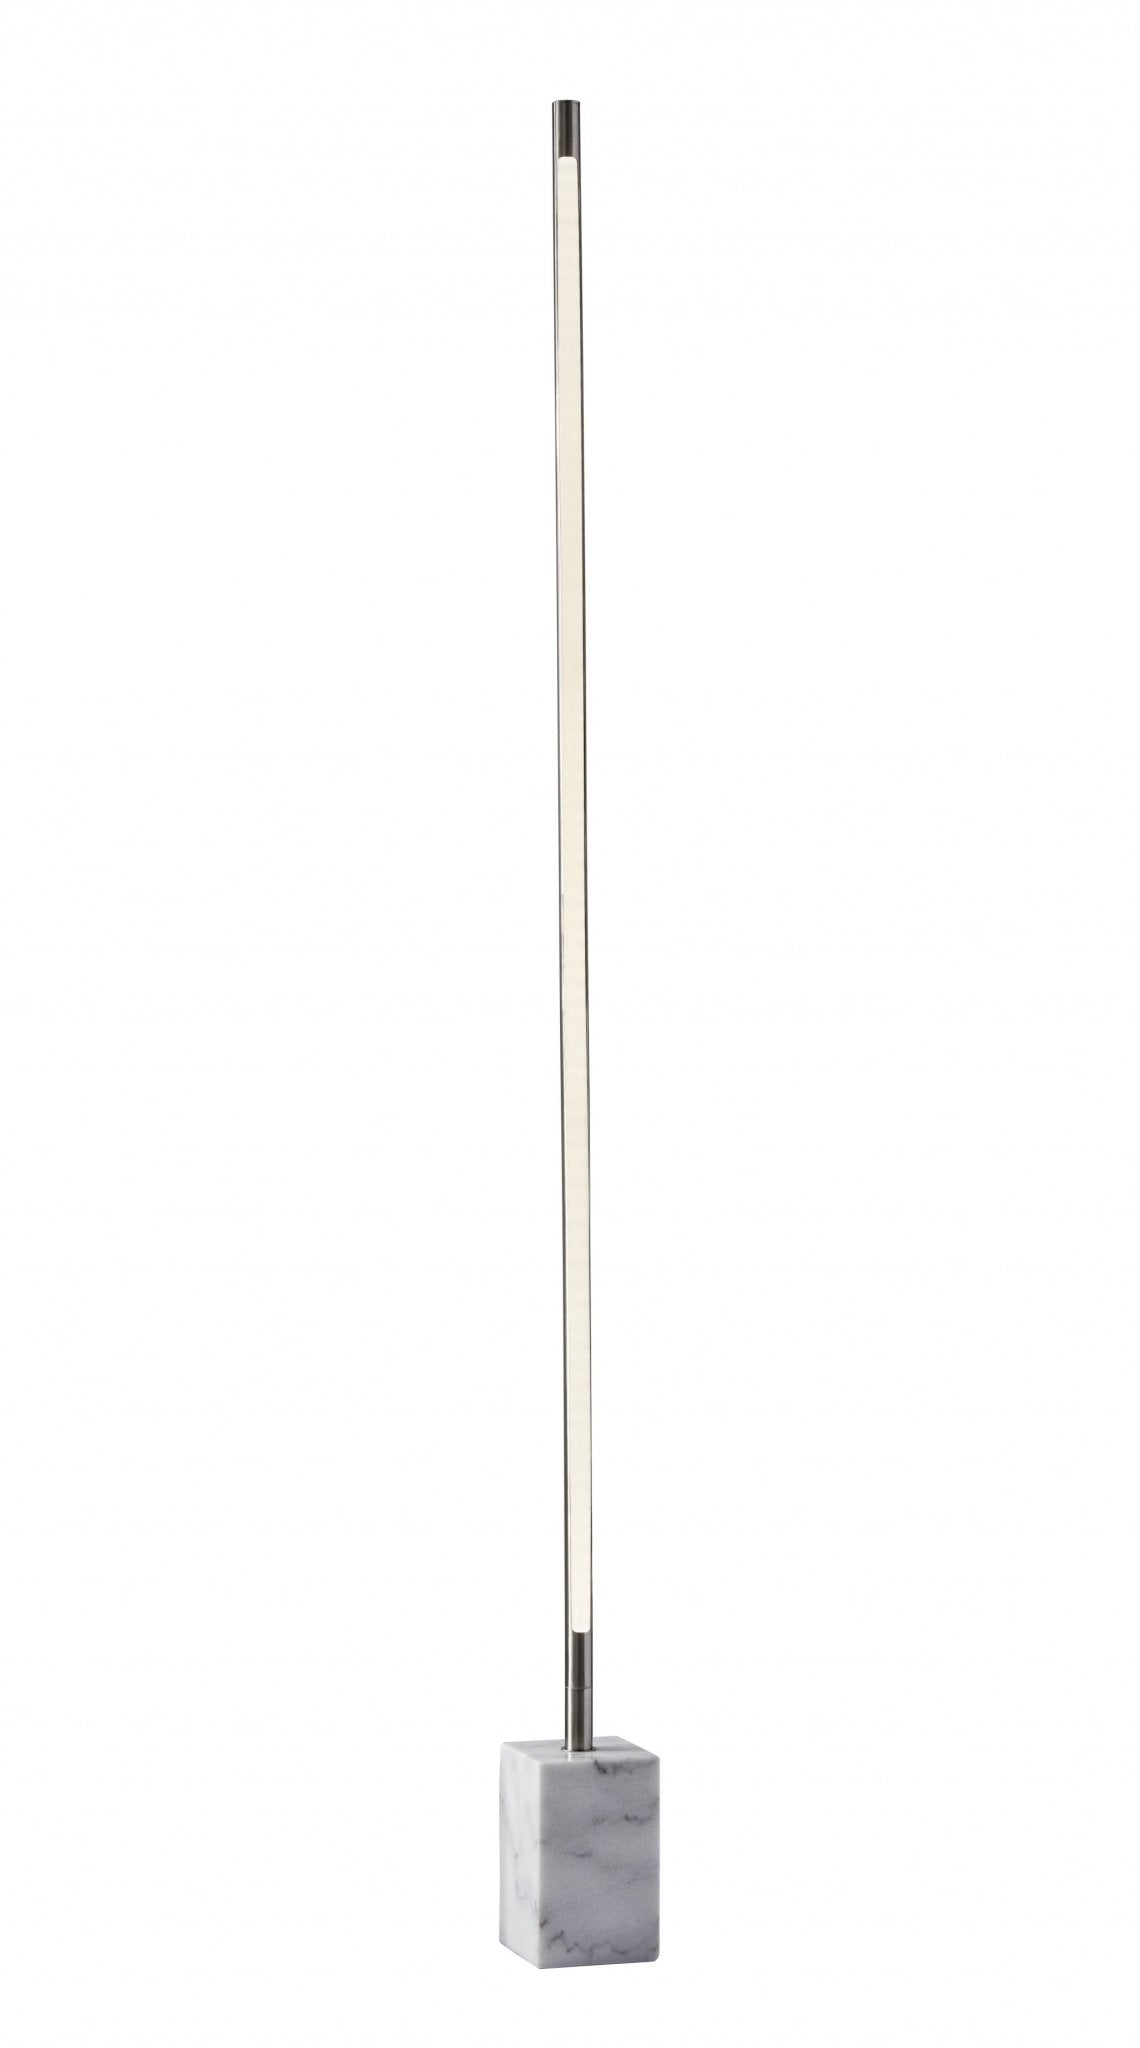 Minimalist-Ambient-Glow-Led-Floor-Lamp-With-Dimmer-In-Antique-Brass-And-Black-Marble-Wall-Lighting